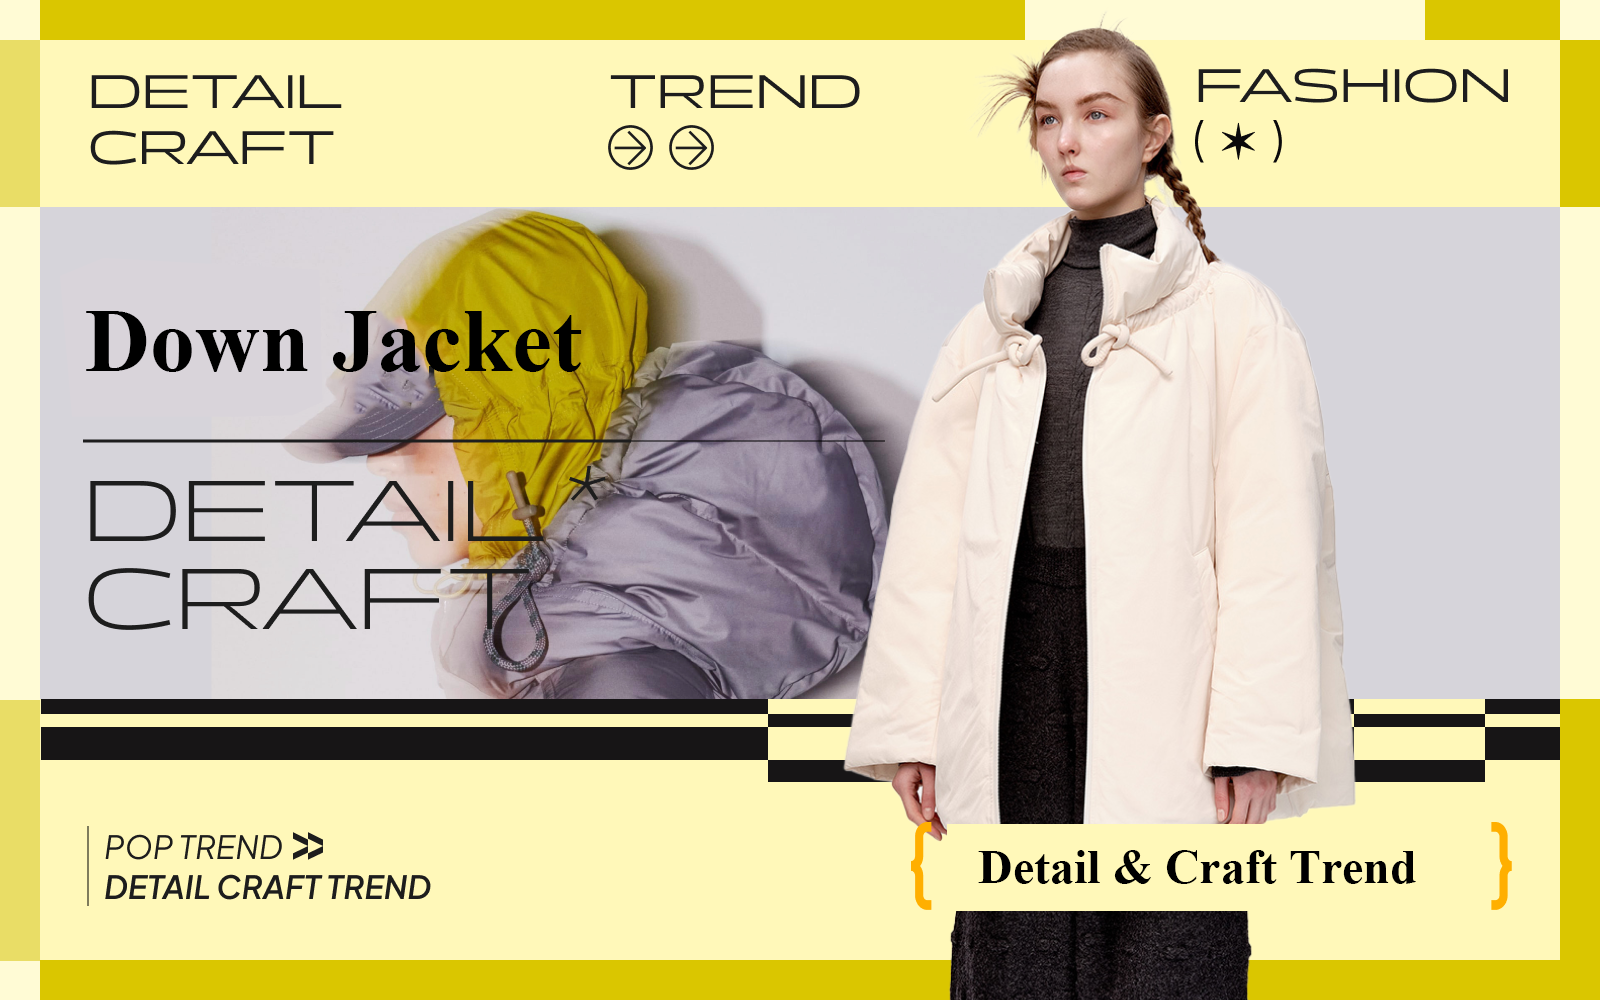 Function & Decoration -- The Detail & Craft Trend for Women's Down Jacket